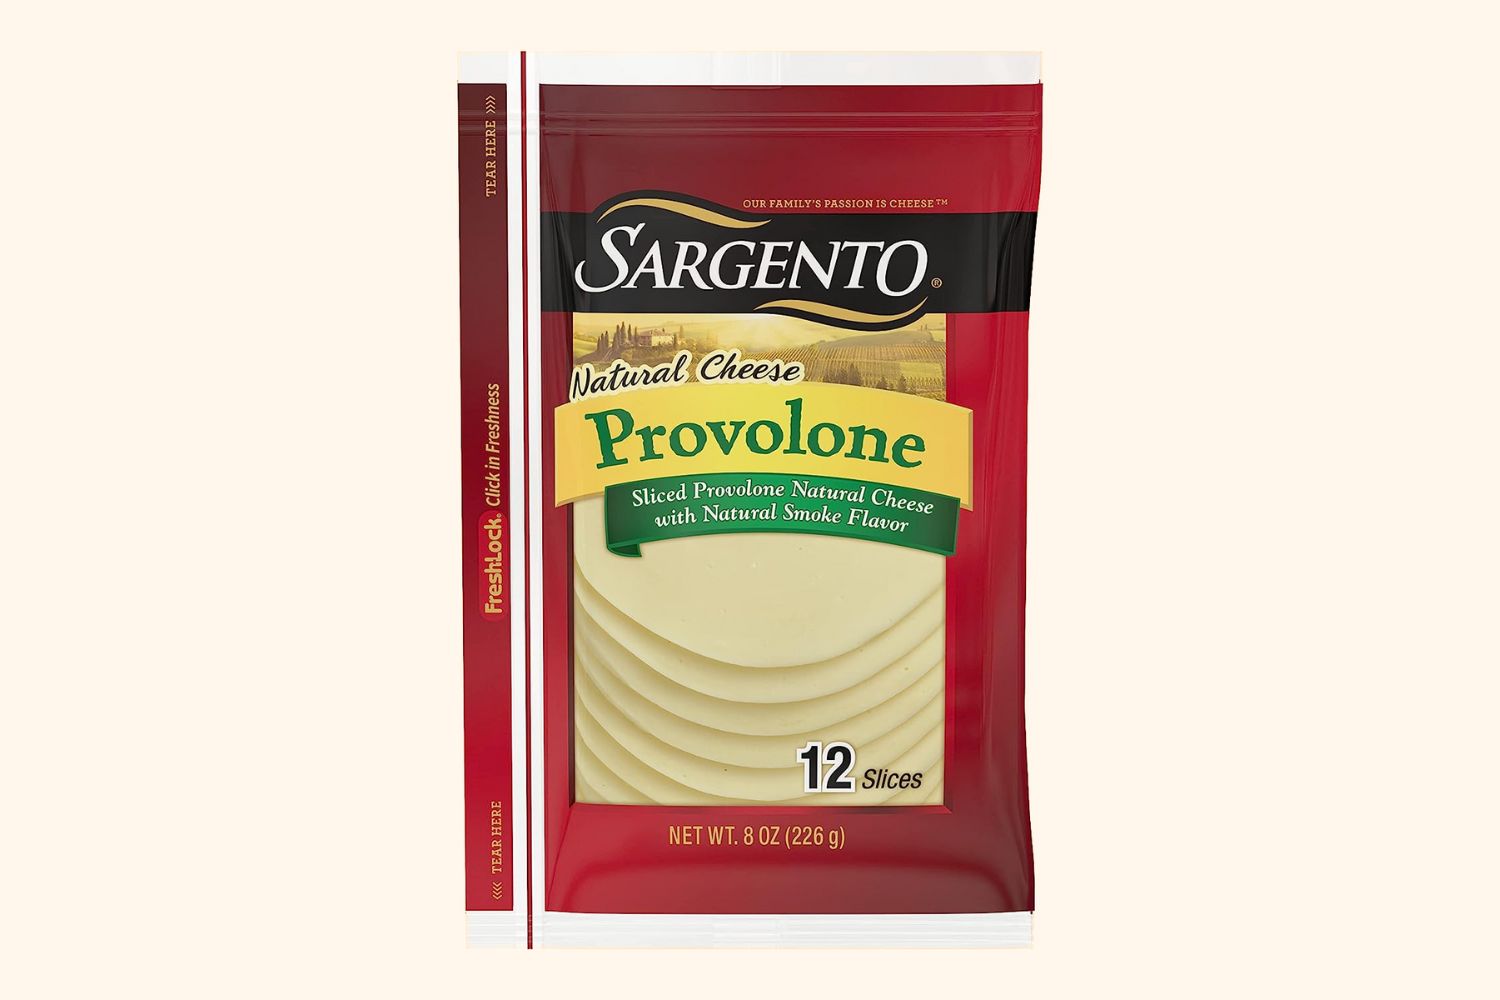 Our choice: Sargento Provolone Natural Cheese Slices